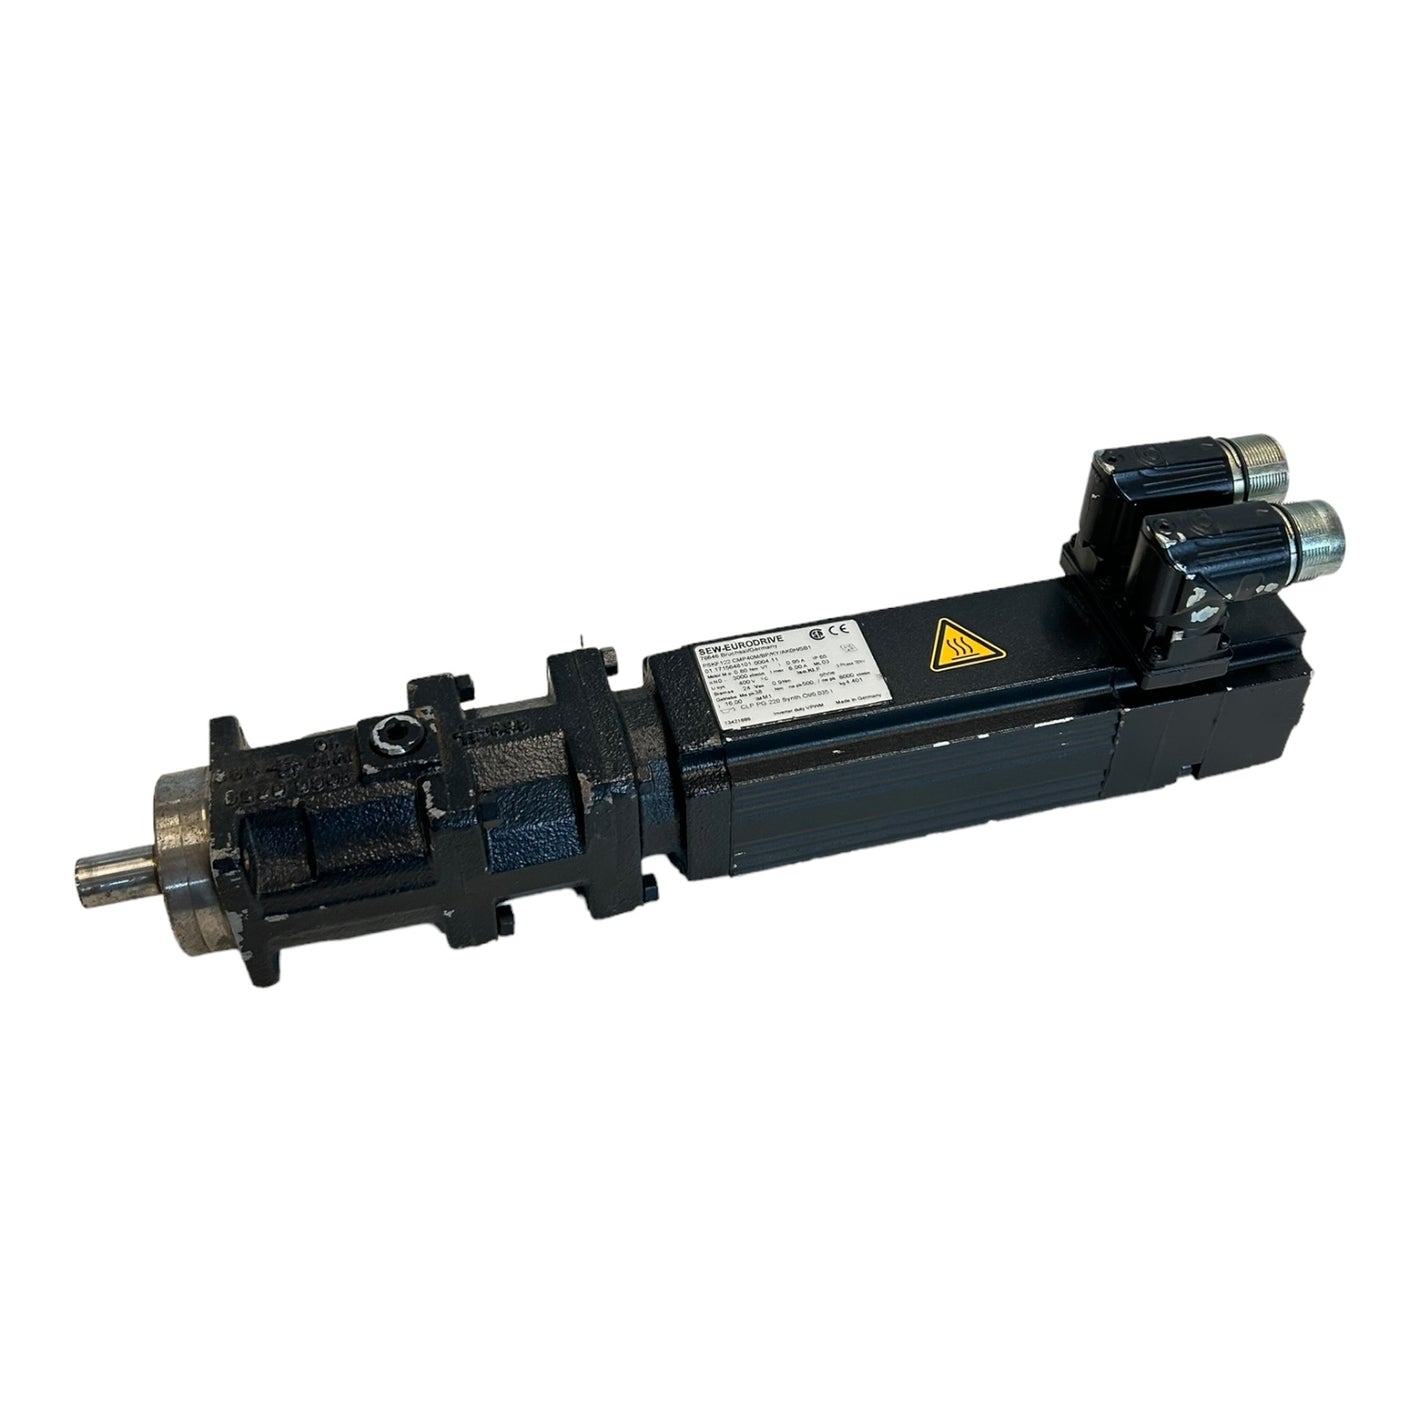 SEW PSKF122CMP40M/BP/KY/AK0H/SB1 servo motor with gearbox for industrial use